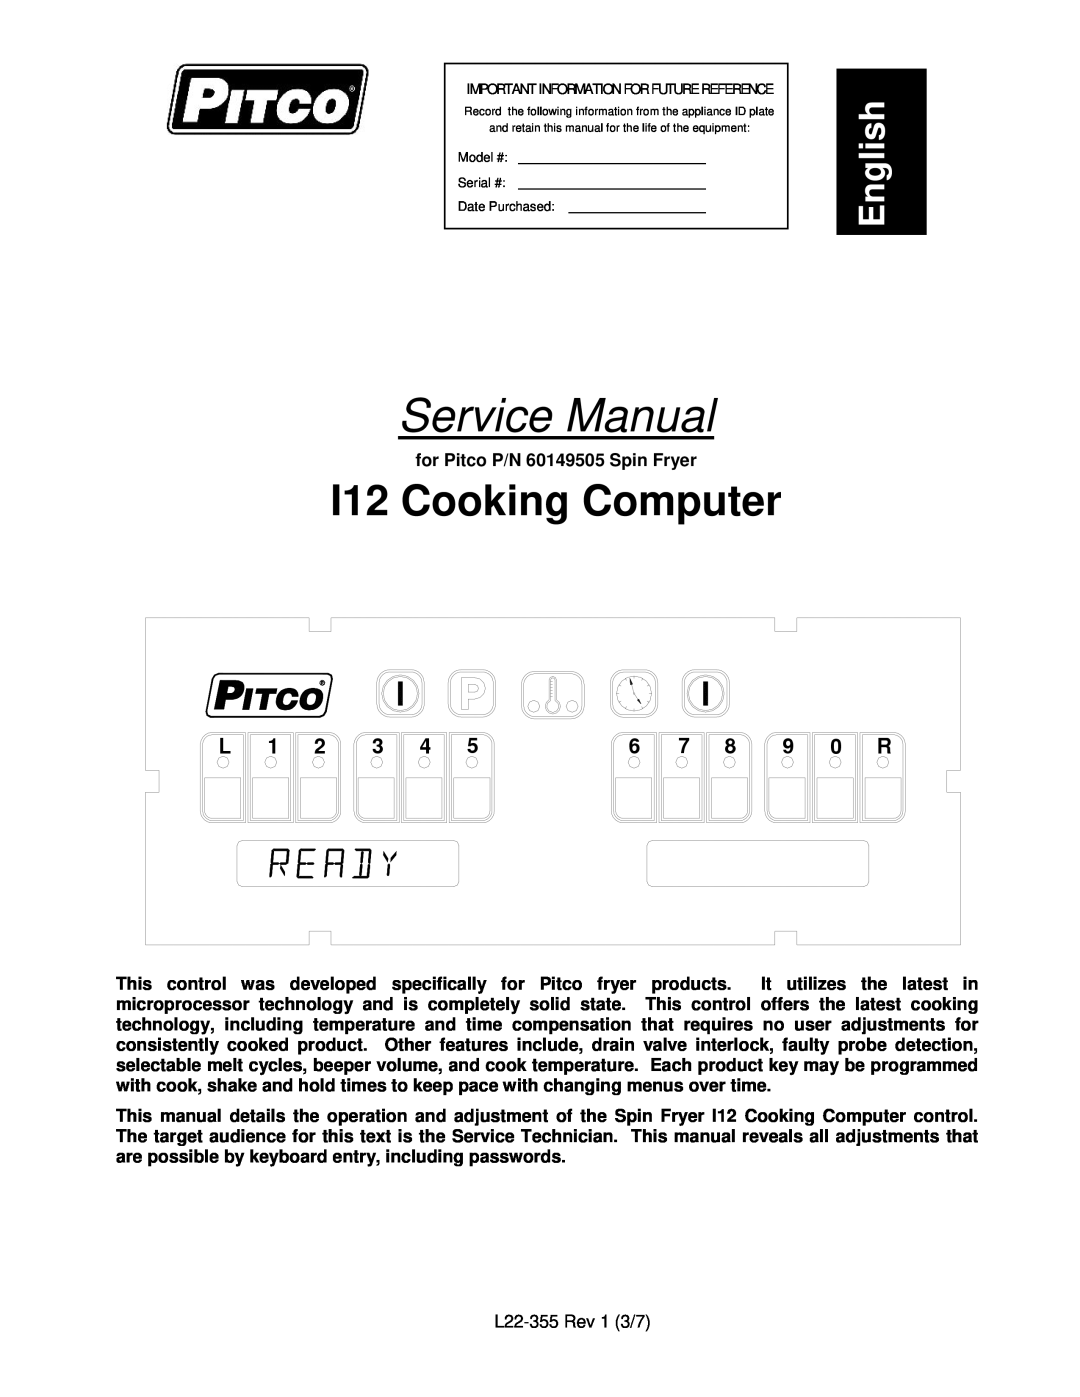 Pitco Frialator L22-355 service manual for Pitco P/N 60149505 Spin Fryer, I12 Cooking Computer, English 